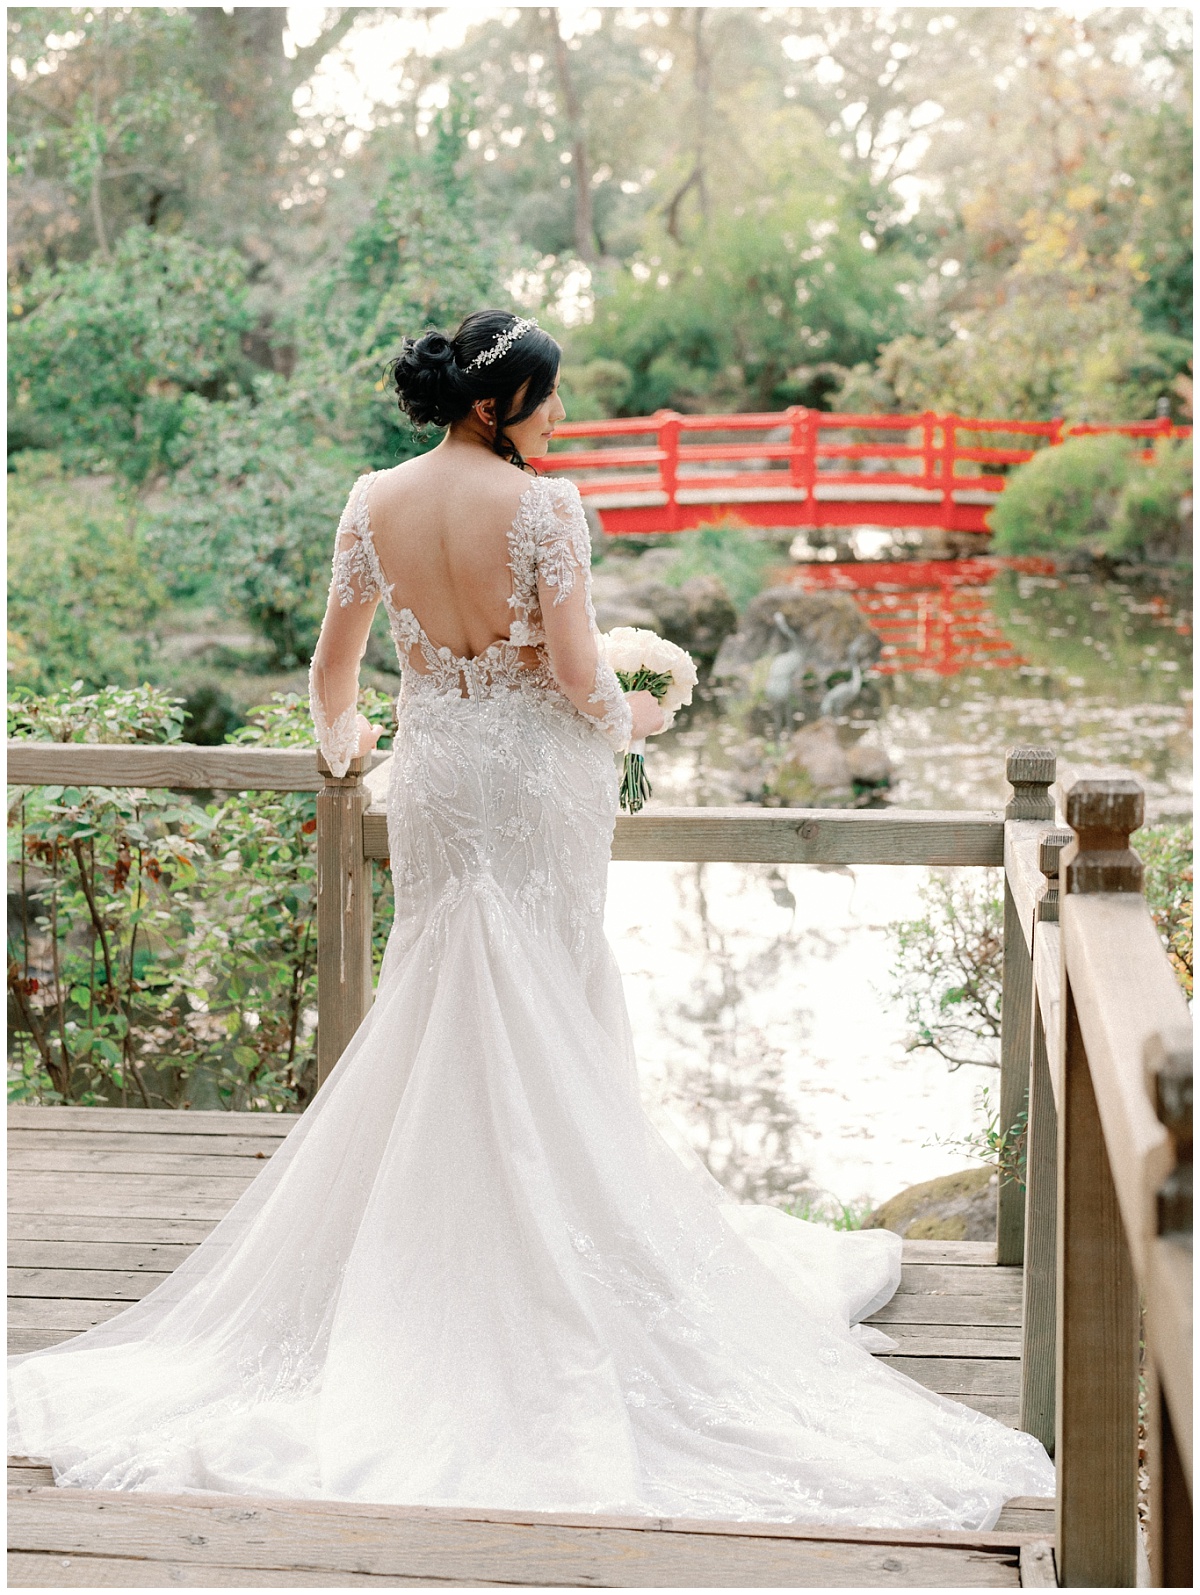 Bridal Portraits near the Japanese Garden with Red Bridge and Koi Pond